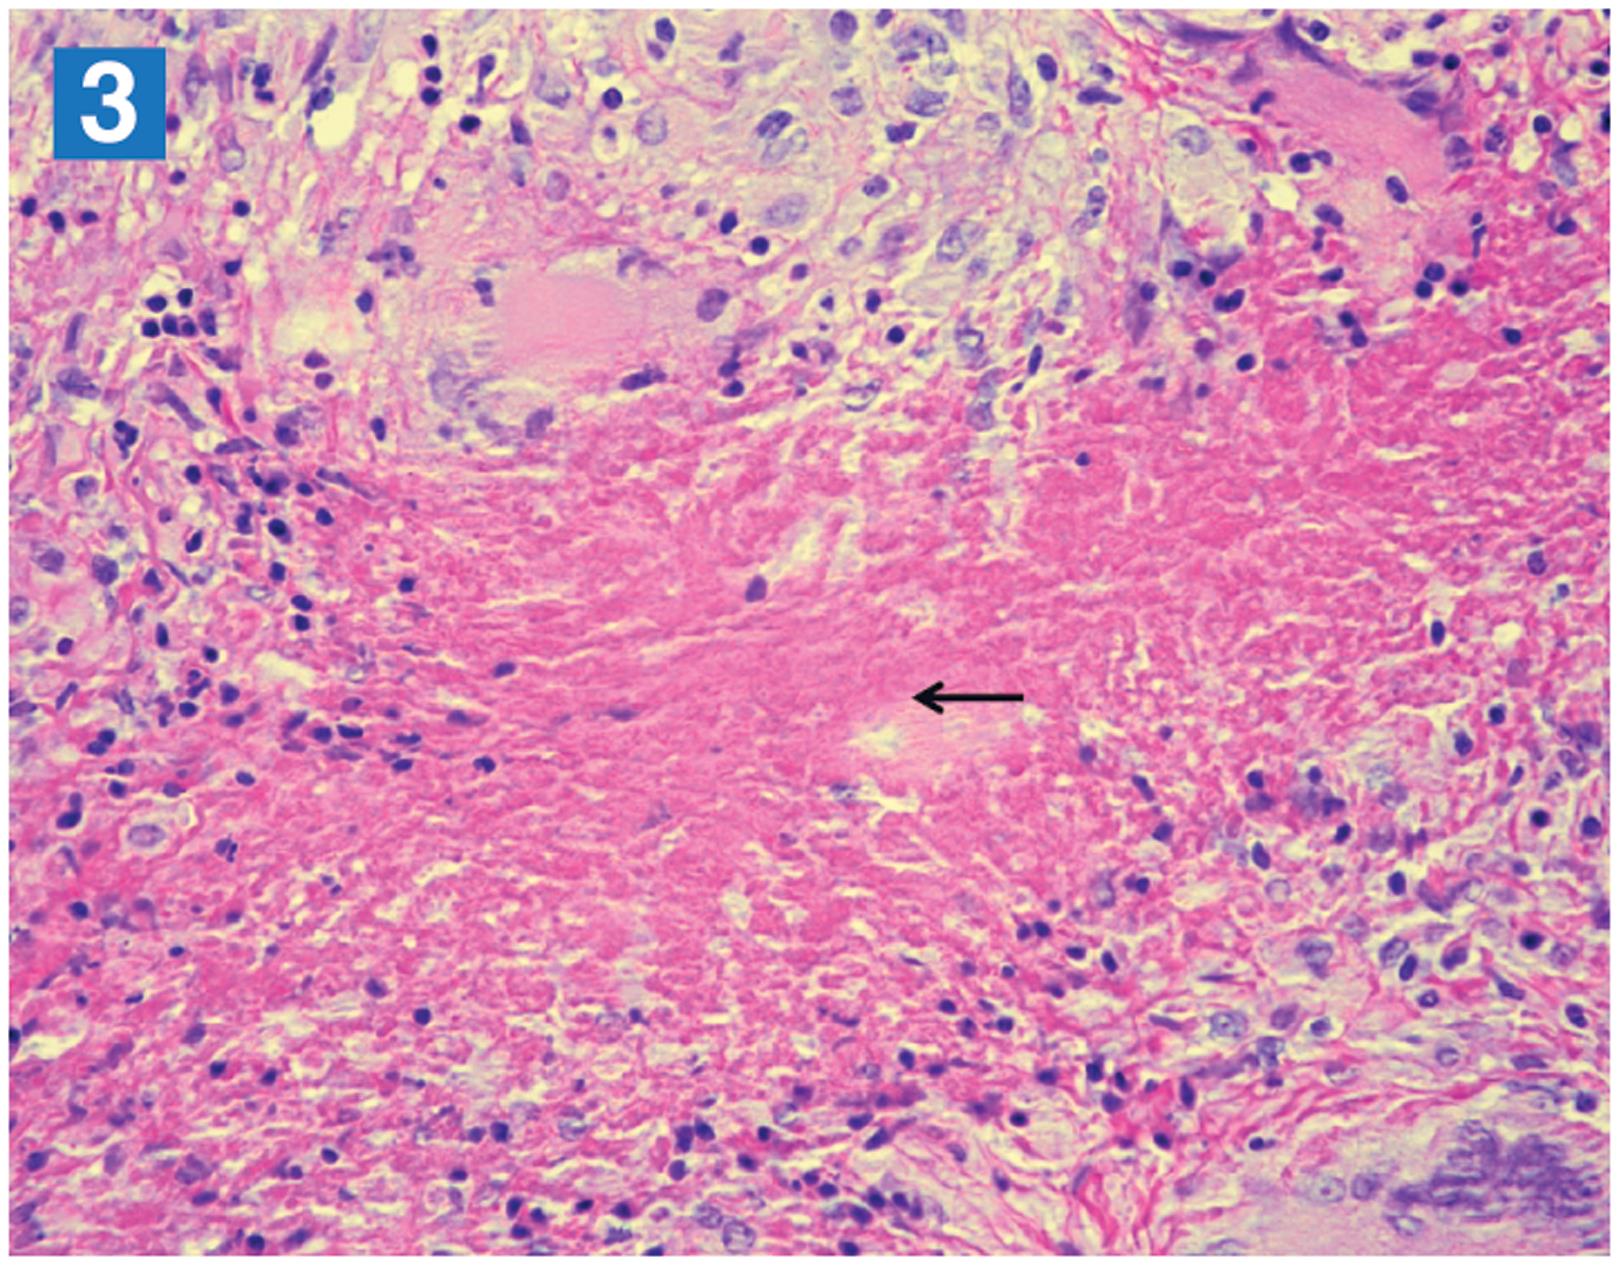 A liver biopsy specimen showing a sarcoid granuloma in liver with central fibrinoid necrosis (arrow)